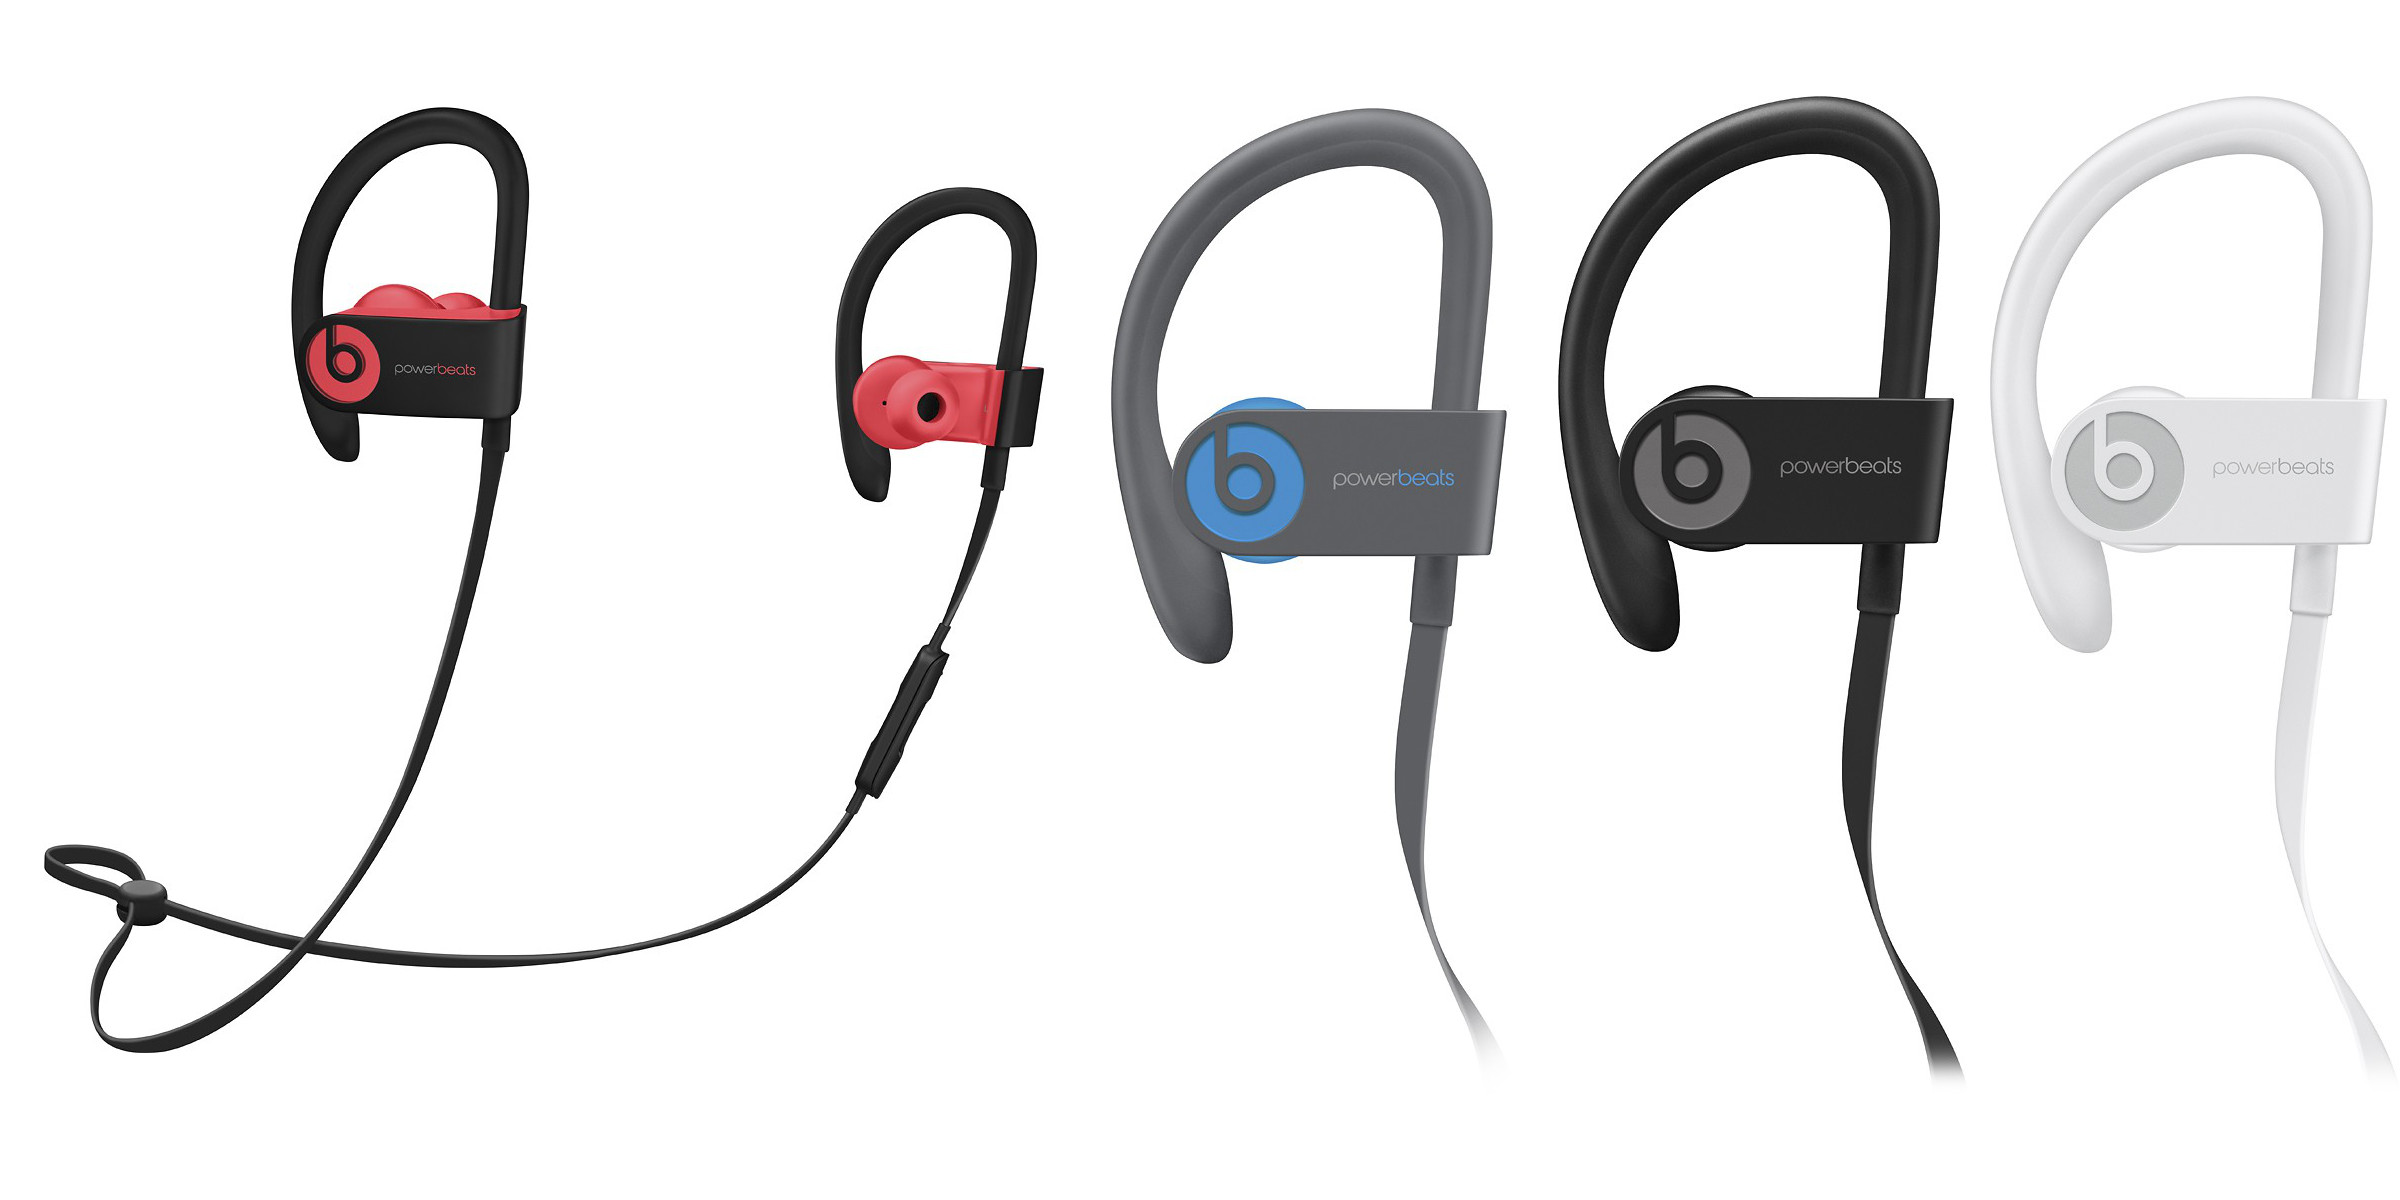 9to5Toys Last Call: Powerbeats3 $110, 15" MacBook Pro w/ Touch Bar $469